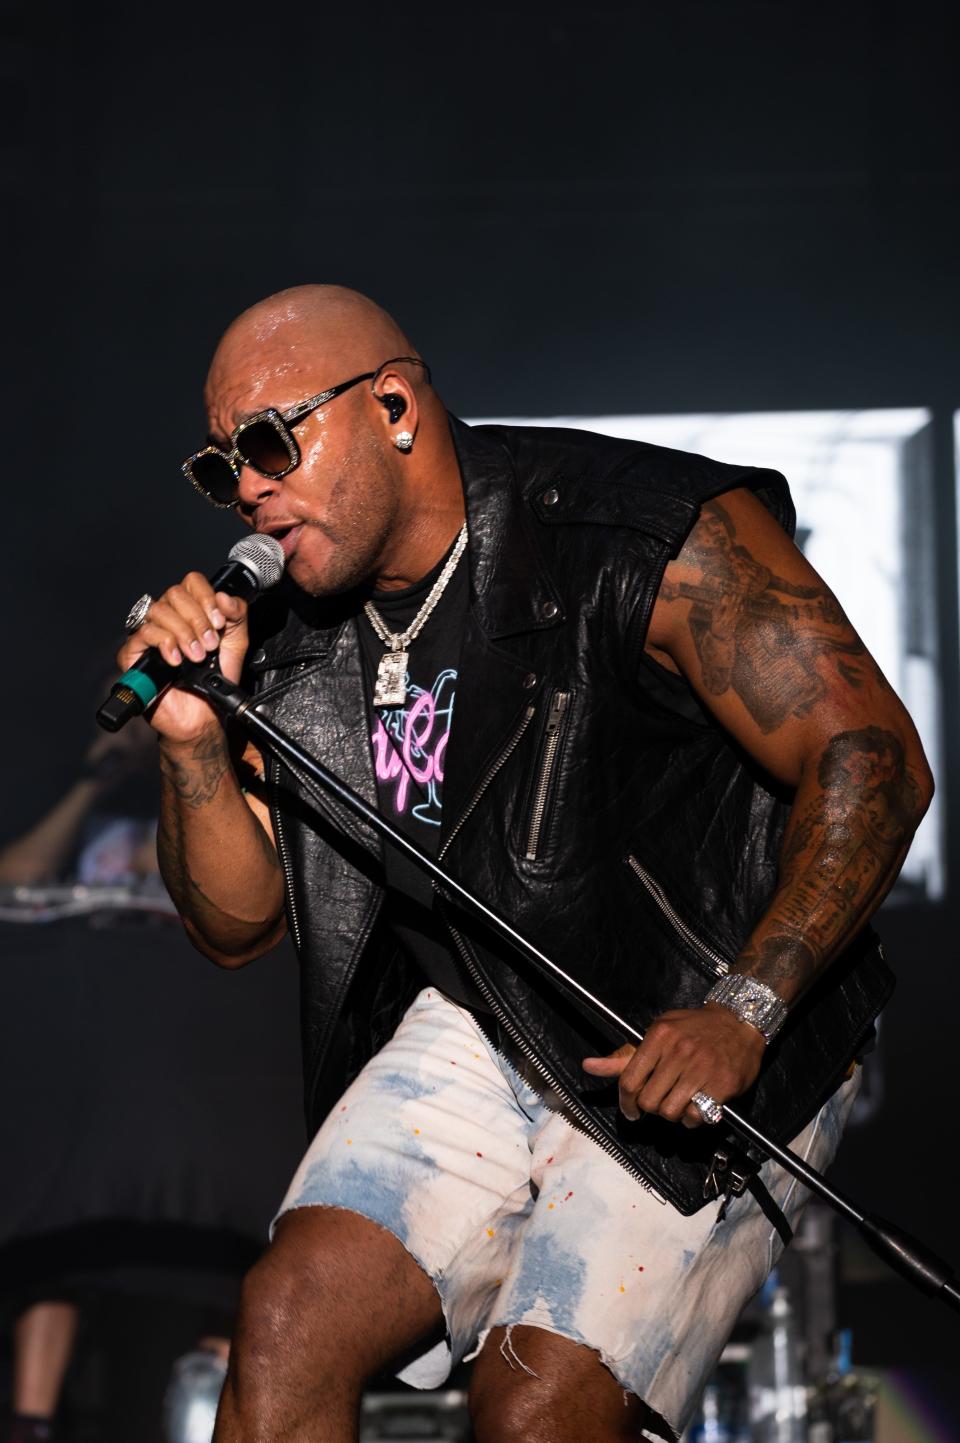 Rapper Flo Rida will be in concert at 8:30 p.m. Saturday for the Titletown District’s Summer Fun Days Showcase.